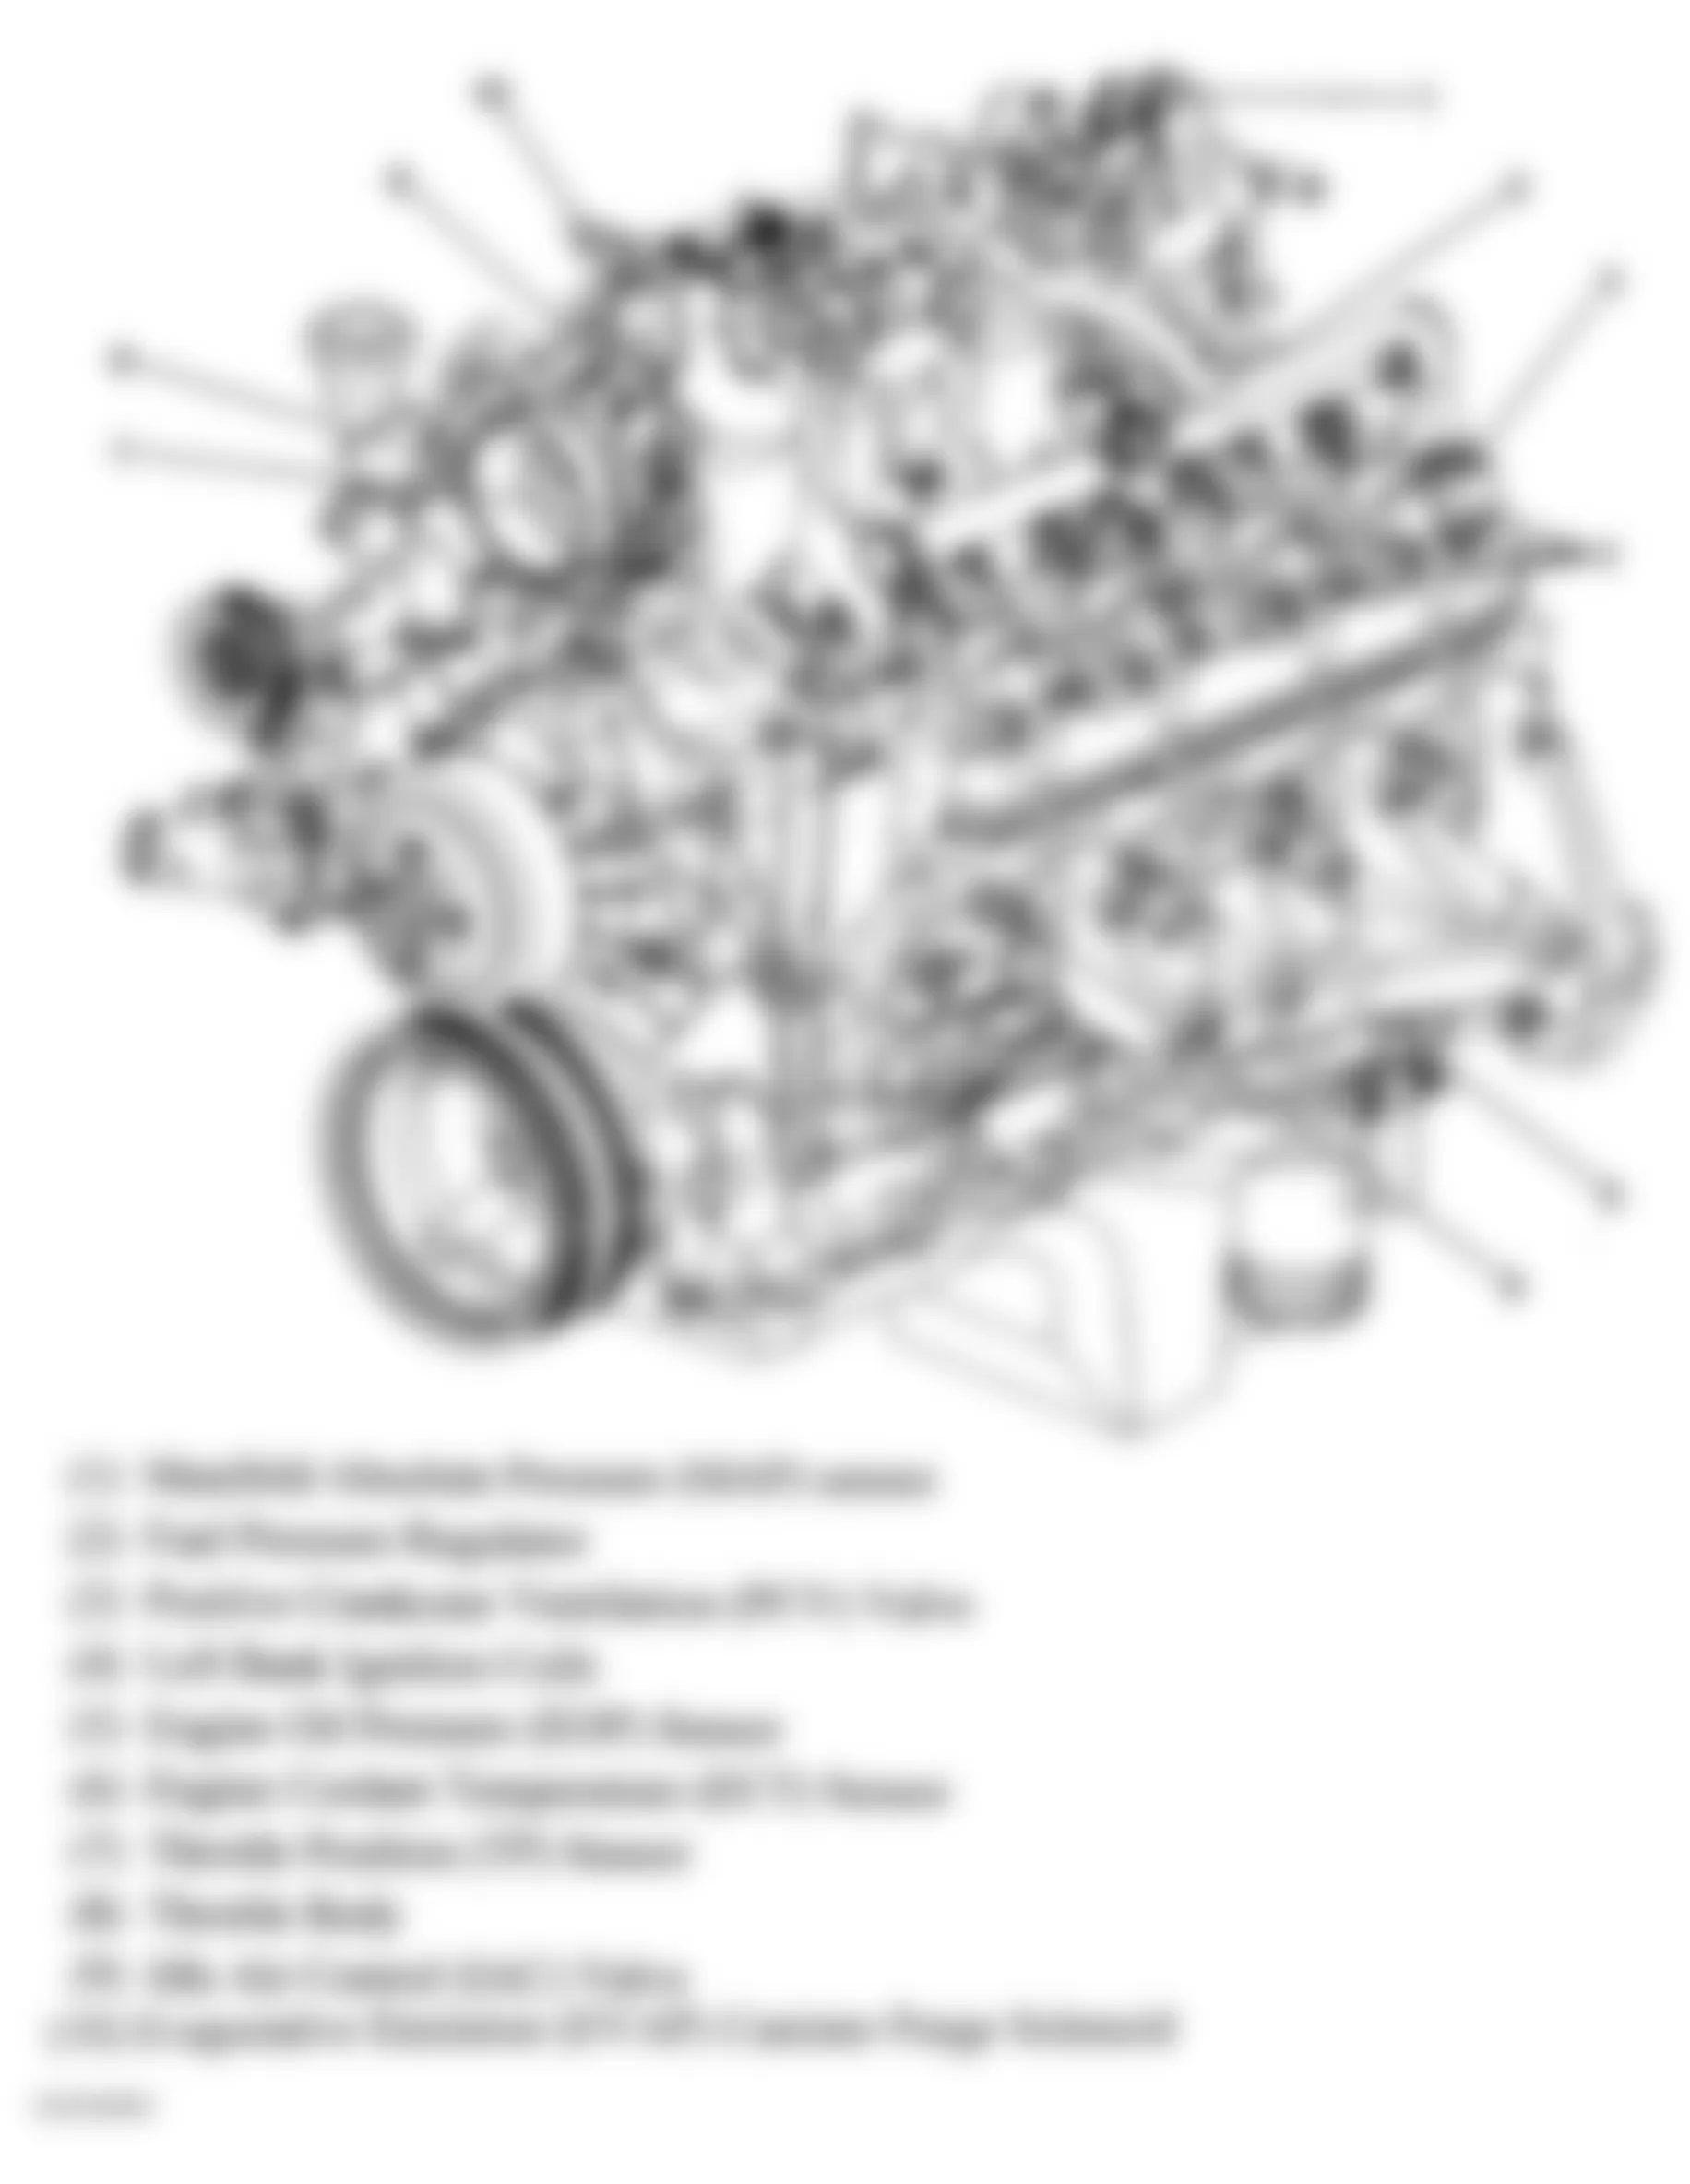 GMC Sierra 3500 2005 - Component Locations -  Left Front Of Engine (4.8L, 5.3L & 6.0L)